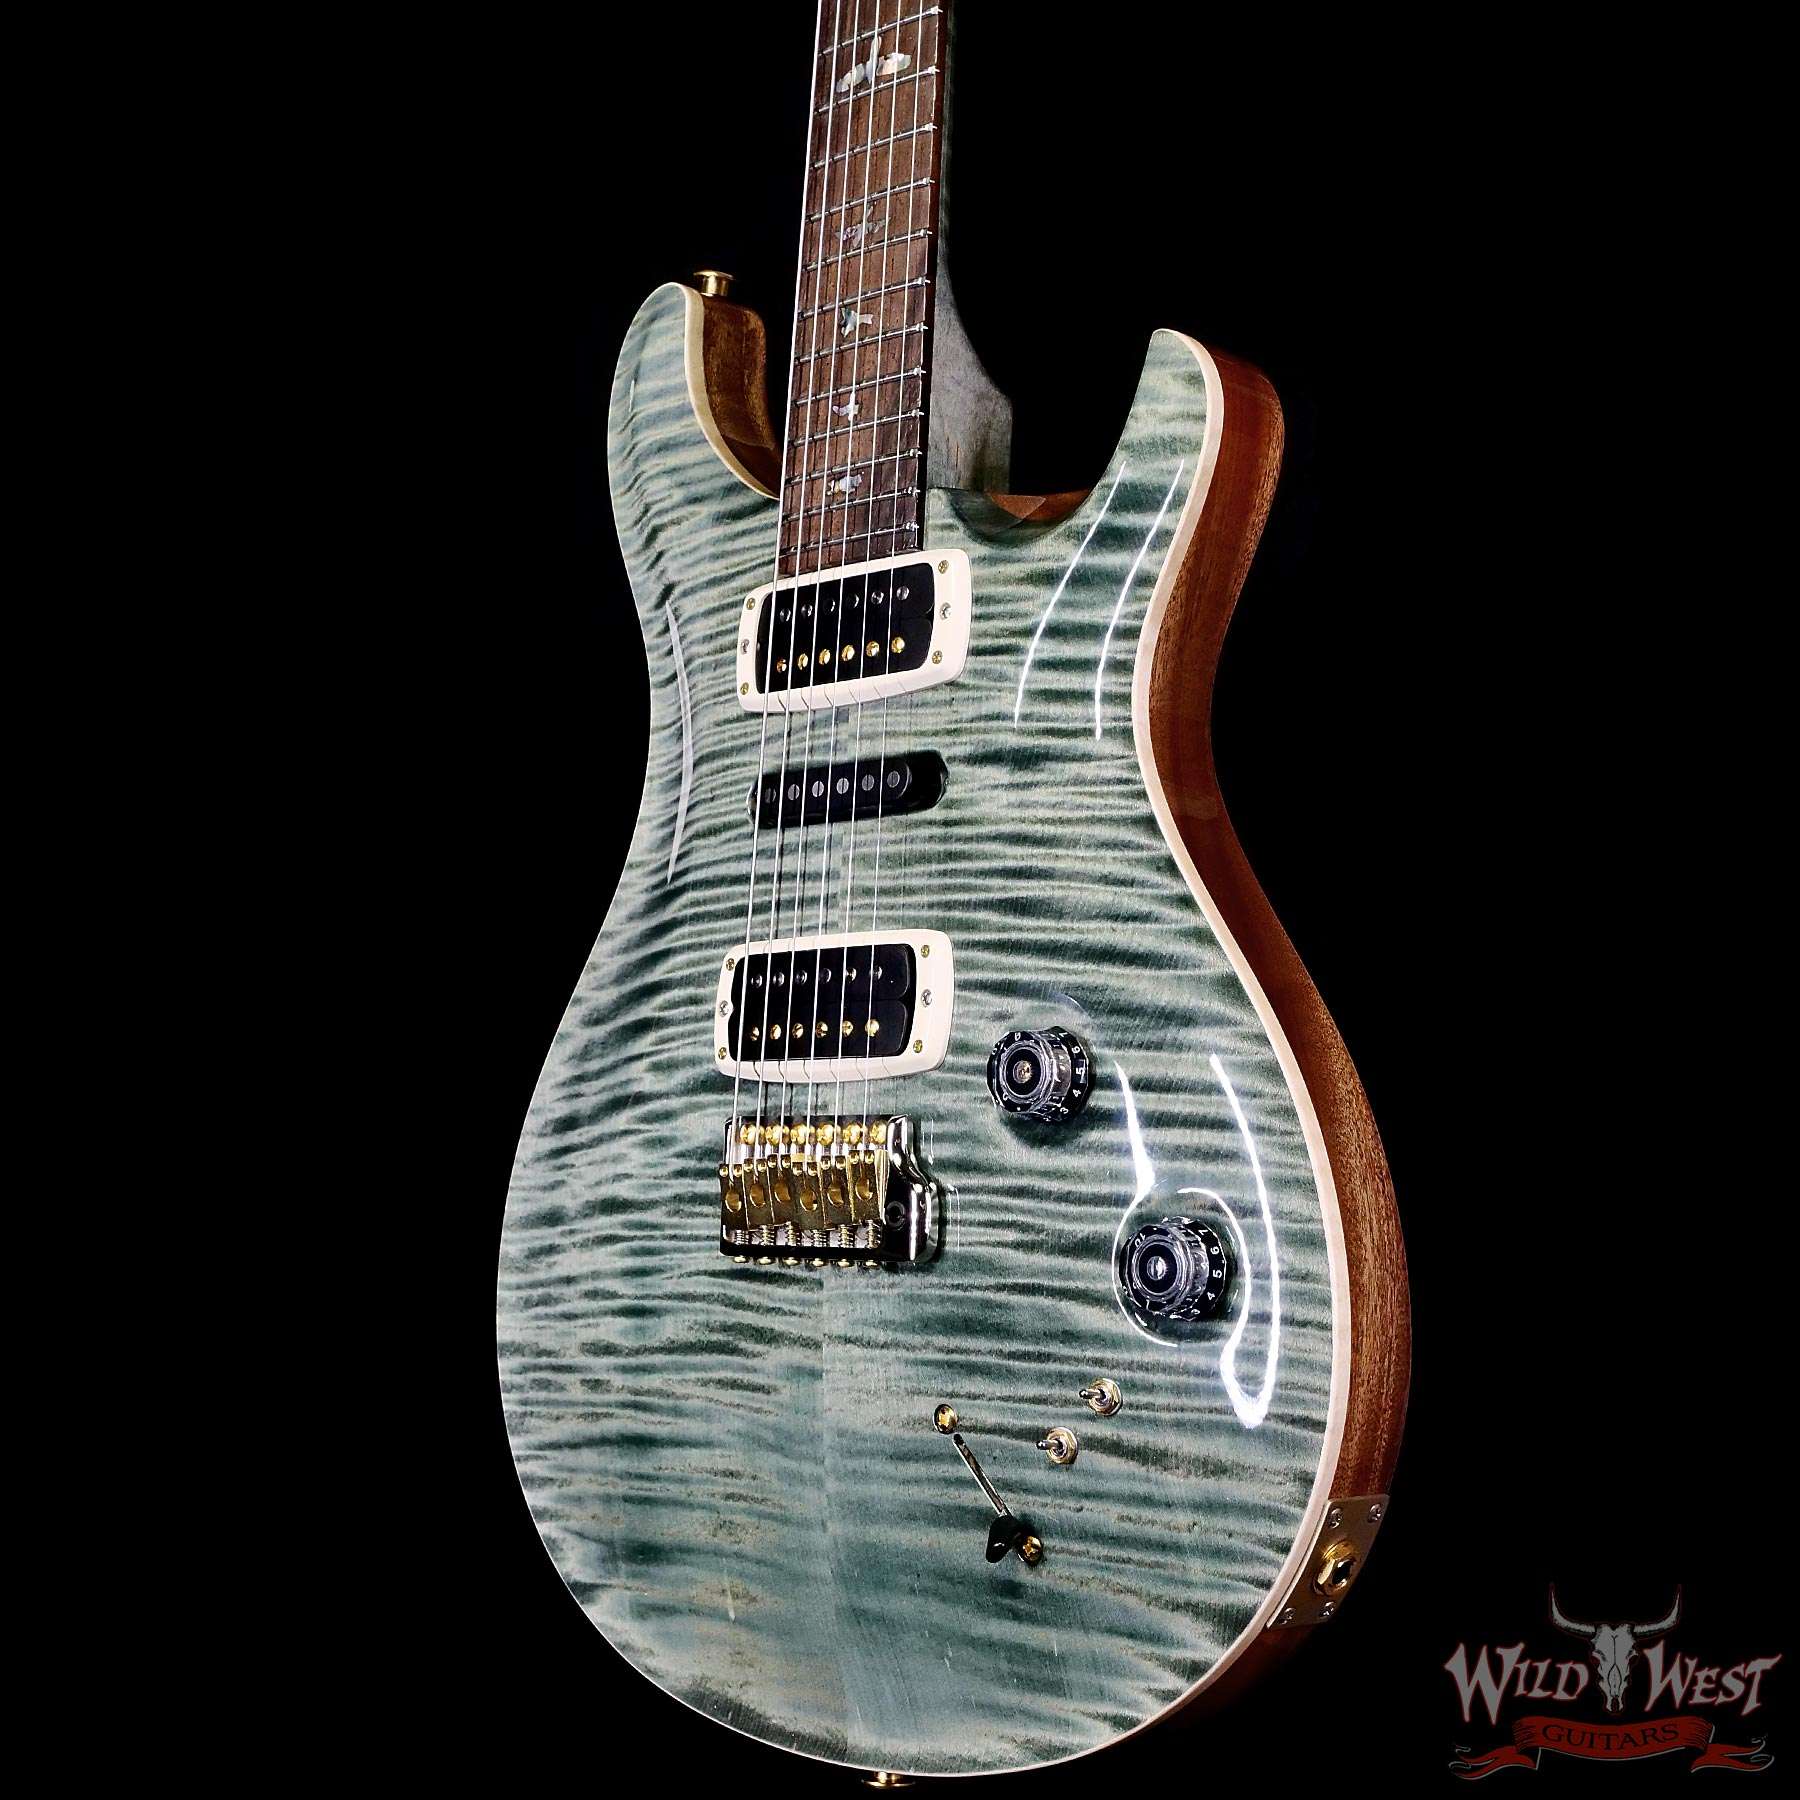 Paul Reed Smith PRS Wood Library 10 Top Modern Eagle V ME5 Flame Maple Neck  Brazilian Rosewood Fingerboard Trampas Green 8.80 LBS (US Only / No ...